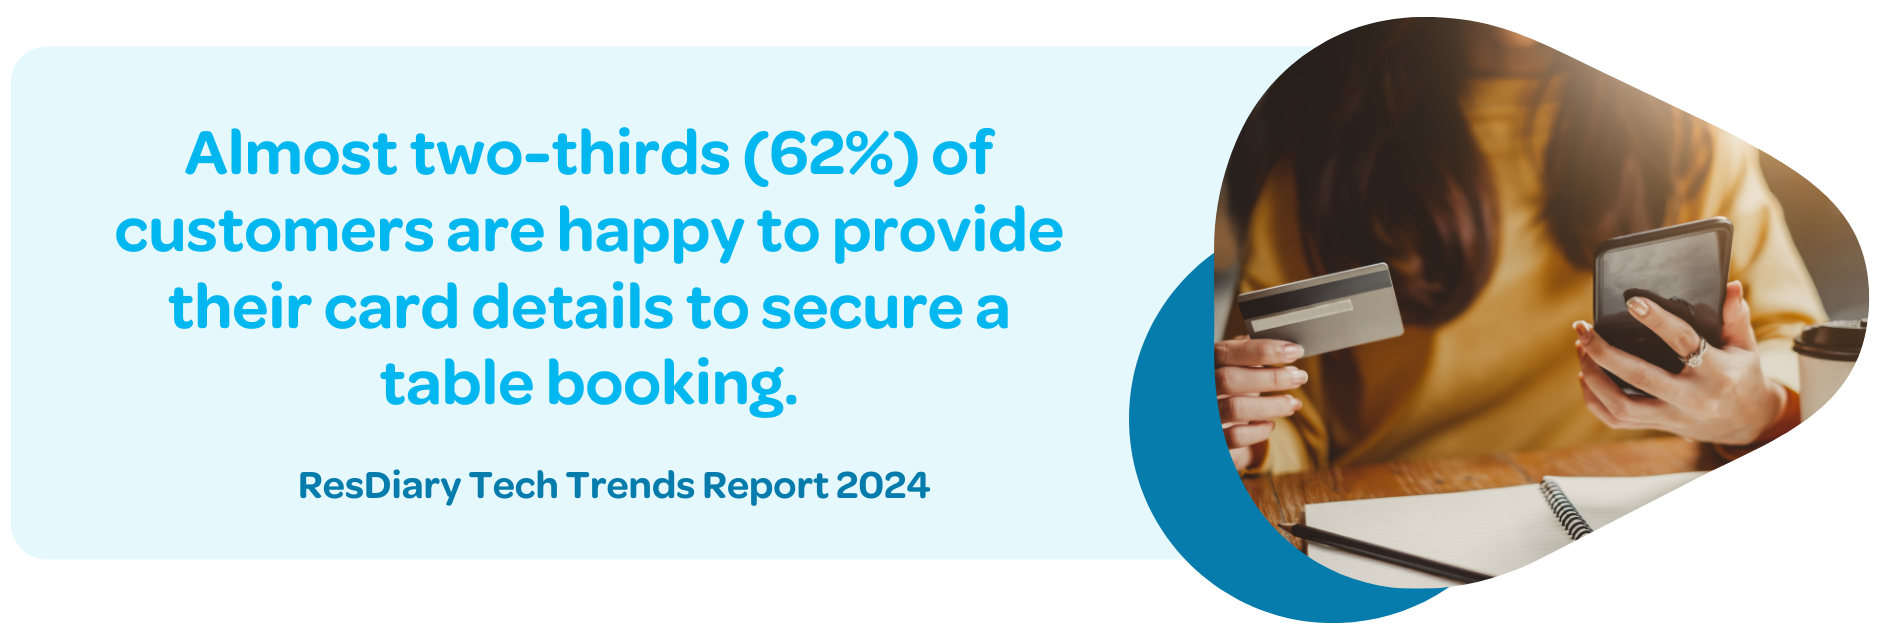 62% of diners are happy to provide card details to secure a restaurant booking